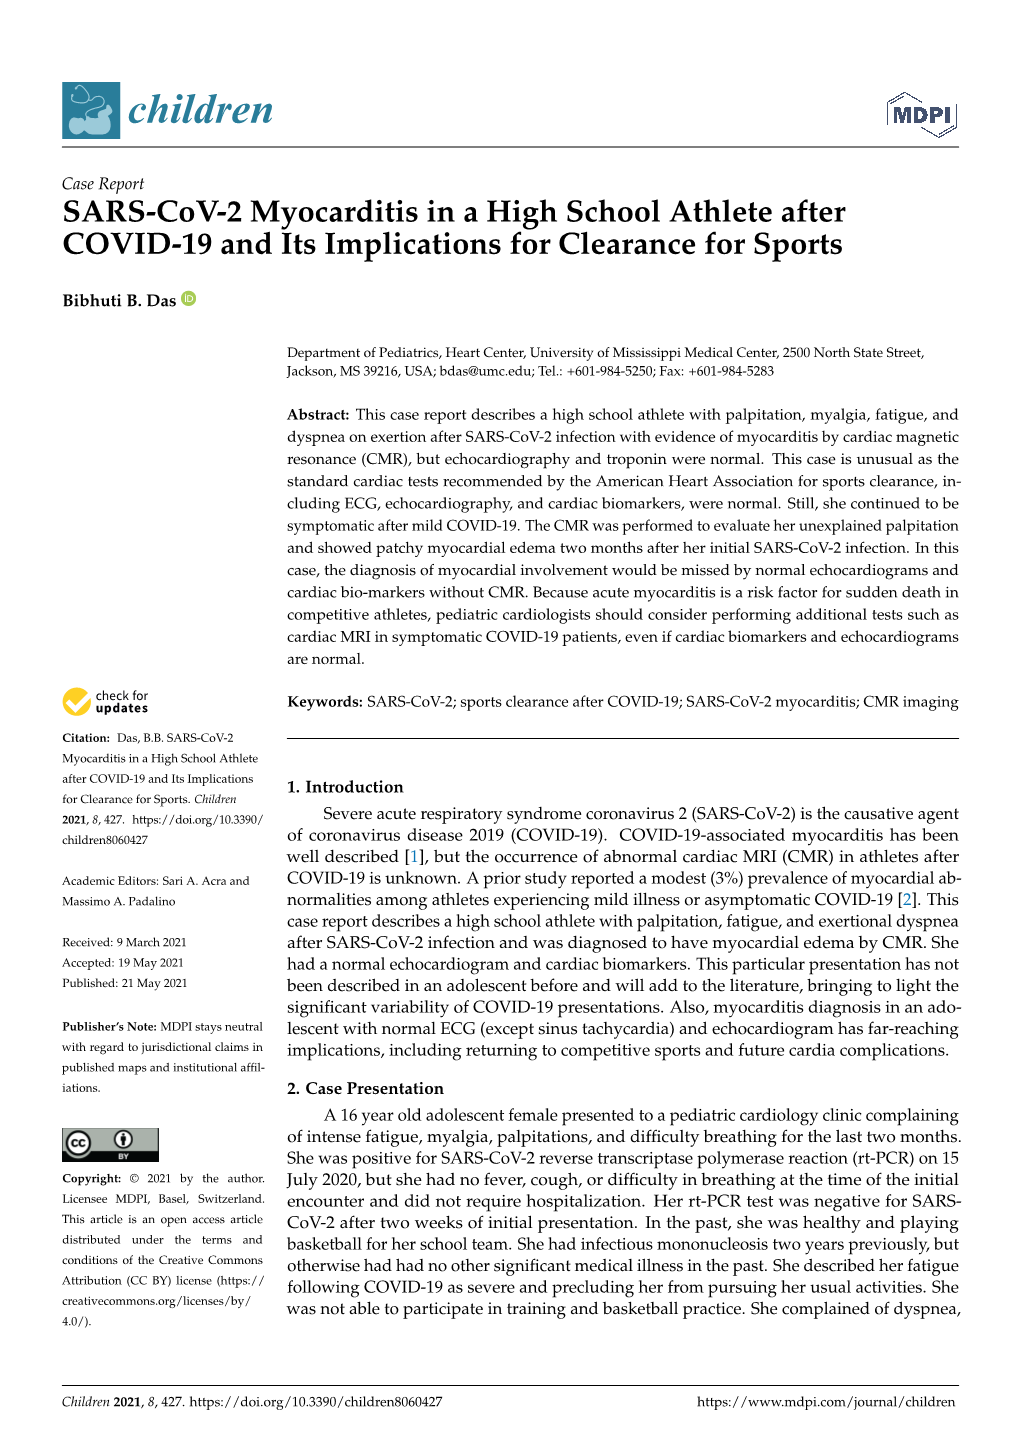 SARS-Cov-2 Myocarditis in a High School Athlete After COVID-19 and Its Implications for Clearance for Sports